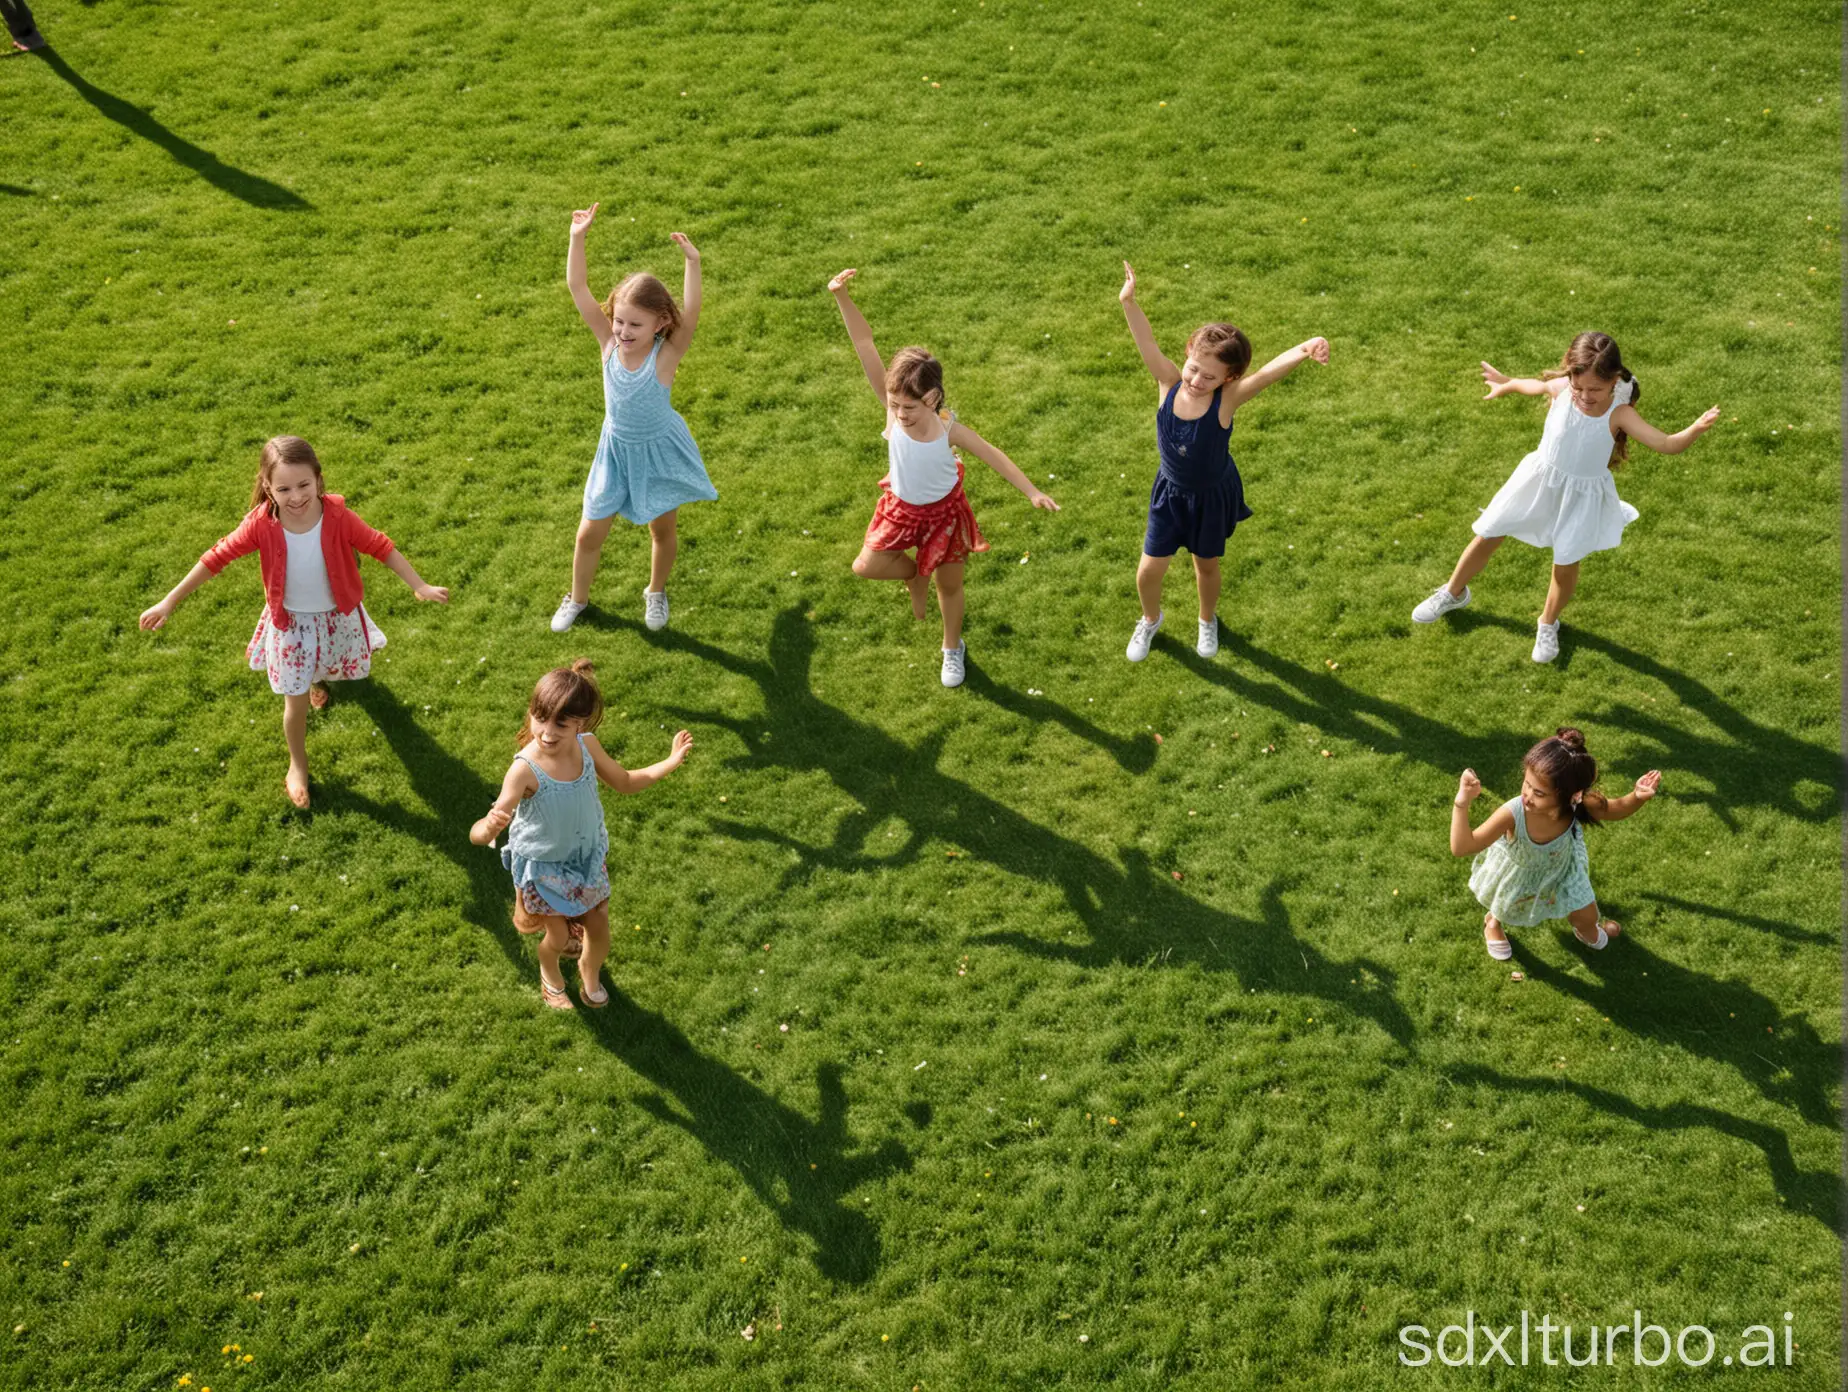 Several children are dancing on the grass.